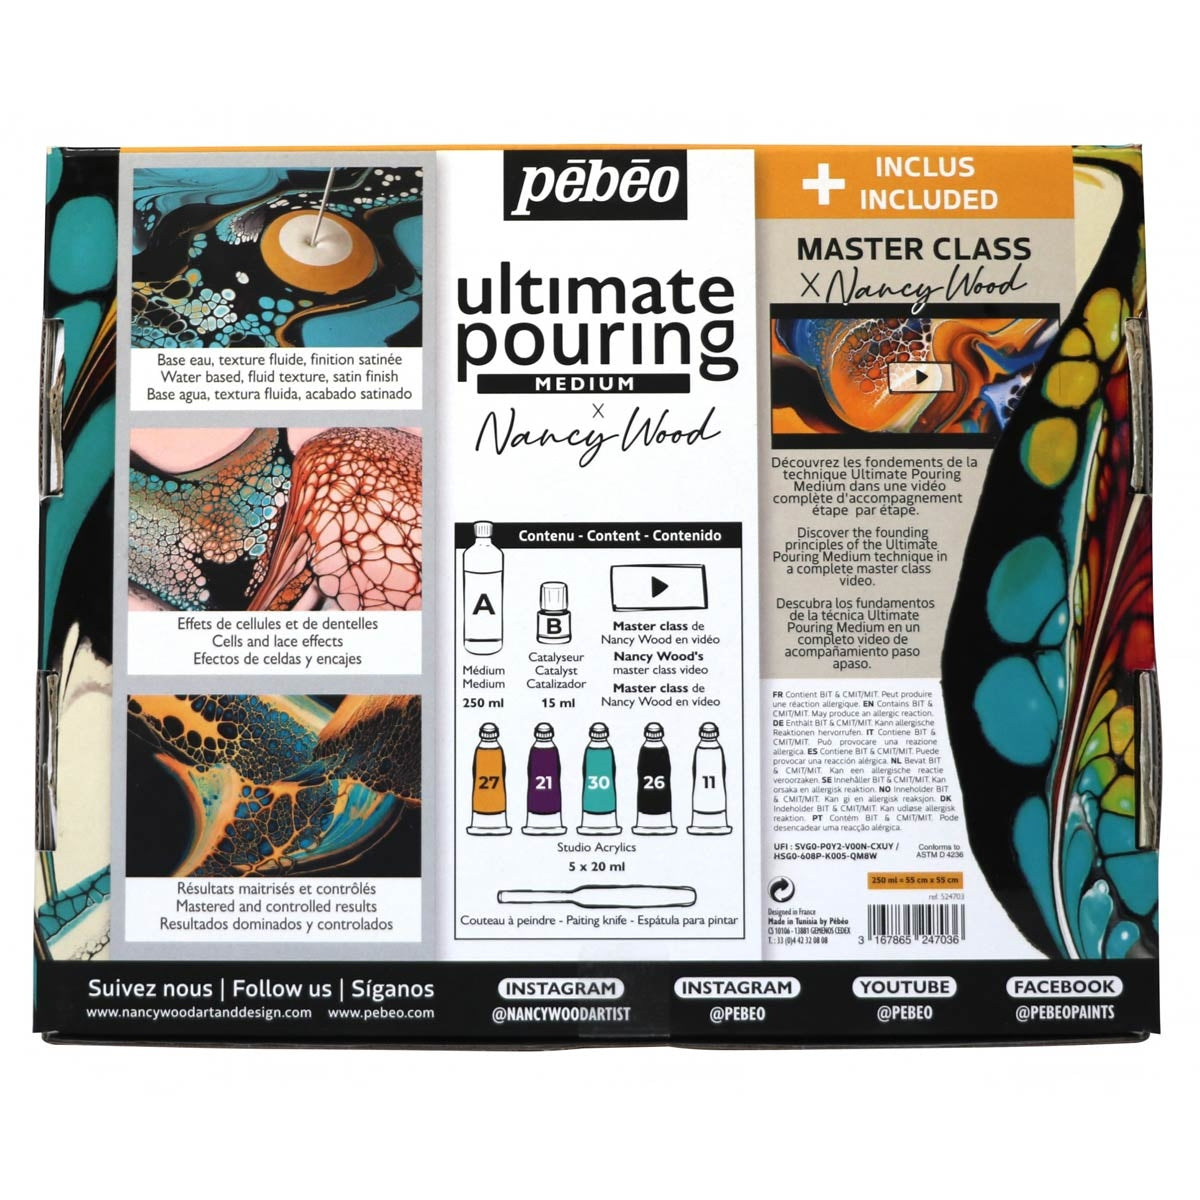 Pebeo - Ultimate Gouring Medium Discovery Kit